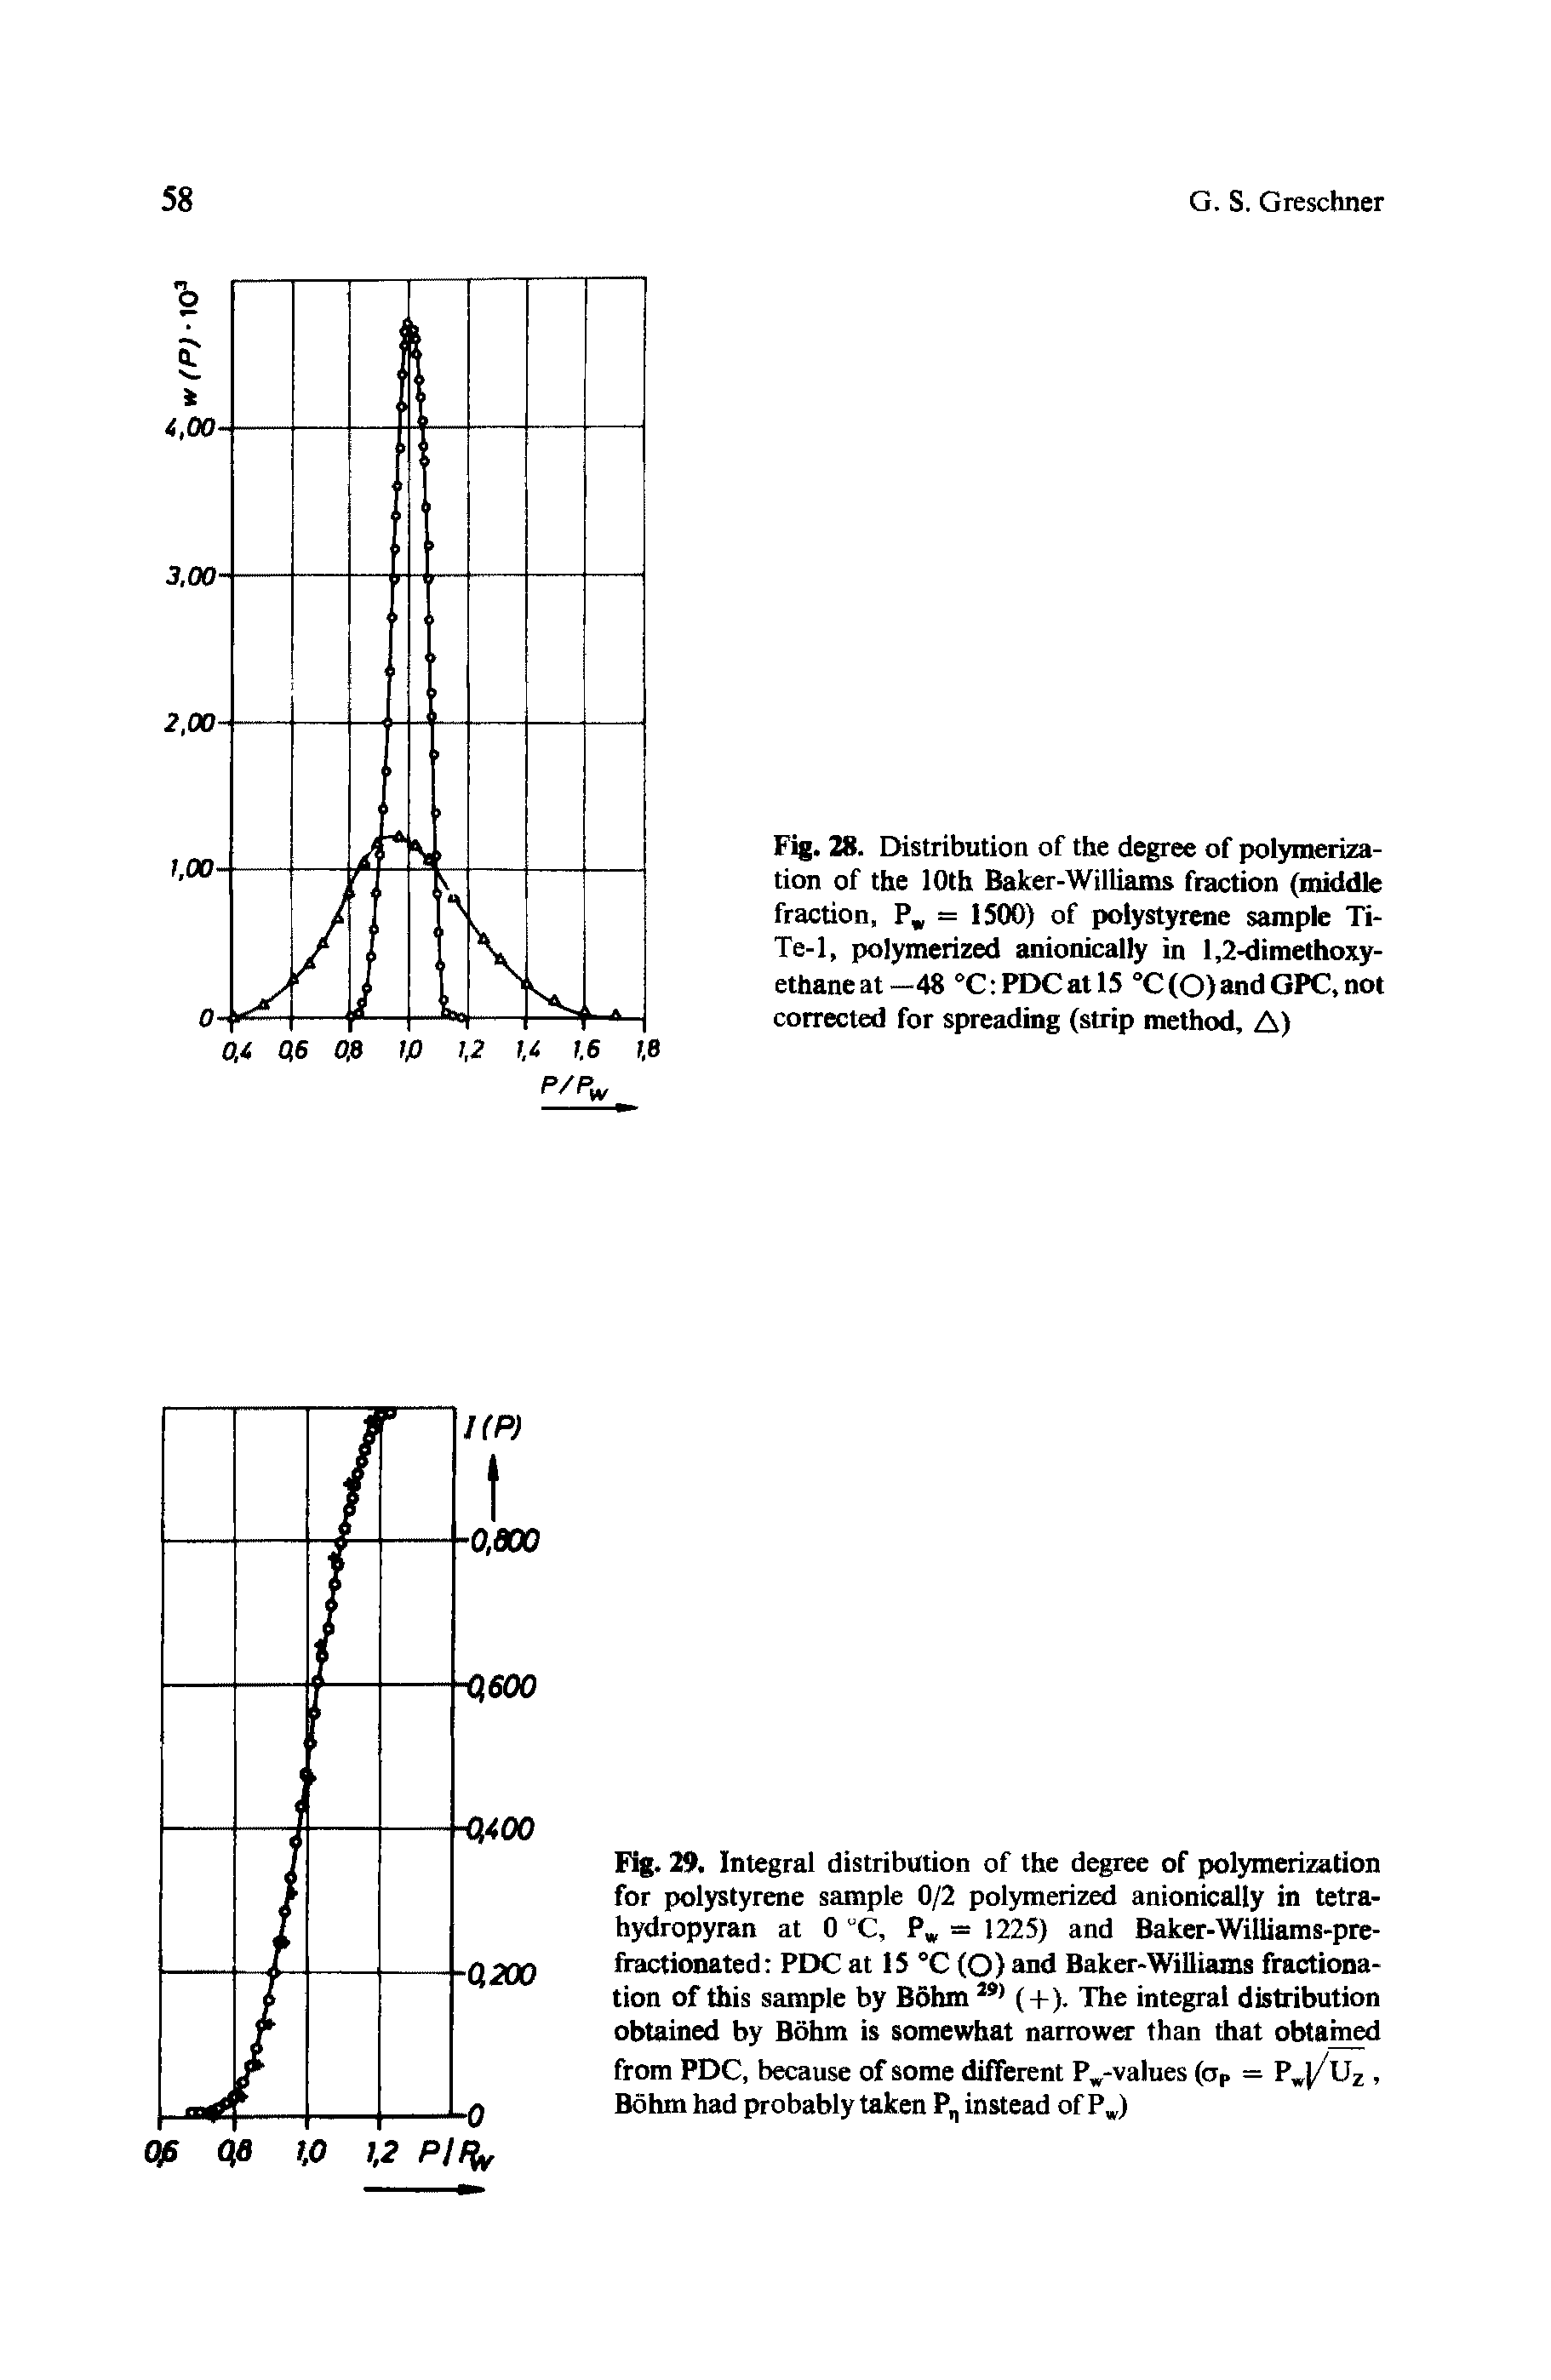 Fig. 29. Integral distribution of the degree of polymerization for polystyrene sample 0/2 polymerized anionically in tetra-hydropyran at 0 "C, Pw = 1225) and Baker-Williams-pre-fractionated PDC at 15 °C (O) and Baker-Williams fractionation of this sample by Bohm J9) (+). The integral distribution obtained by Bohm is somewhat narrower than that obtained from PDC, because of some different Pw-values (aP = Pw(/ Uz, Bohm had probably taken Pn instead of Pw)...